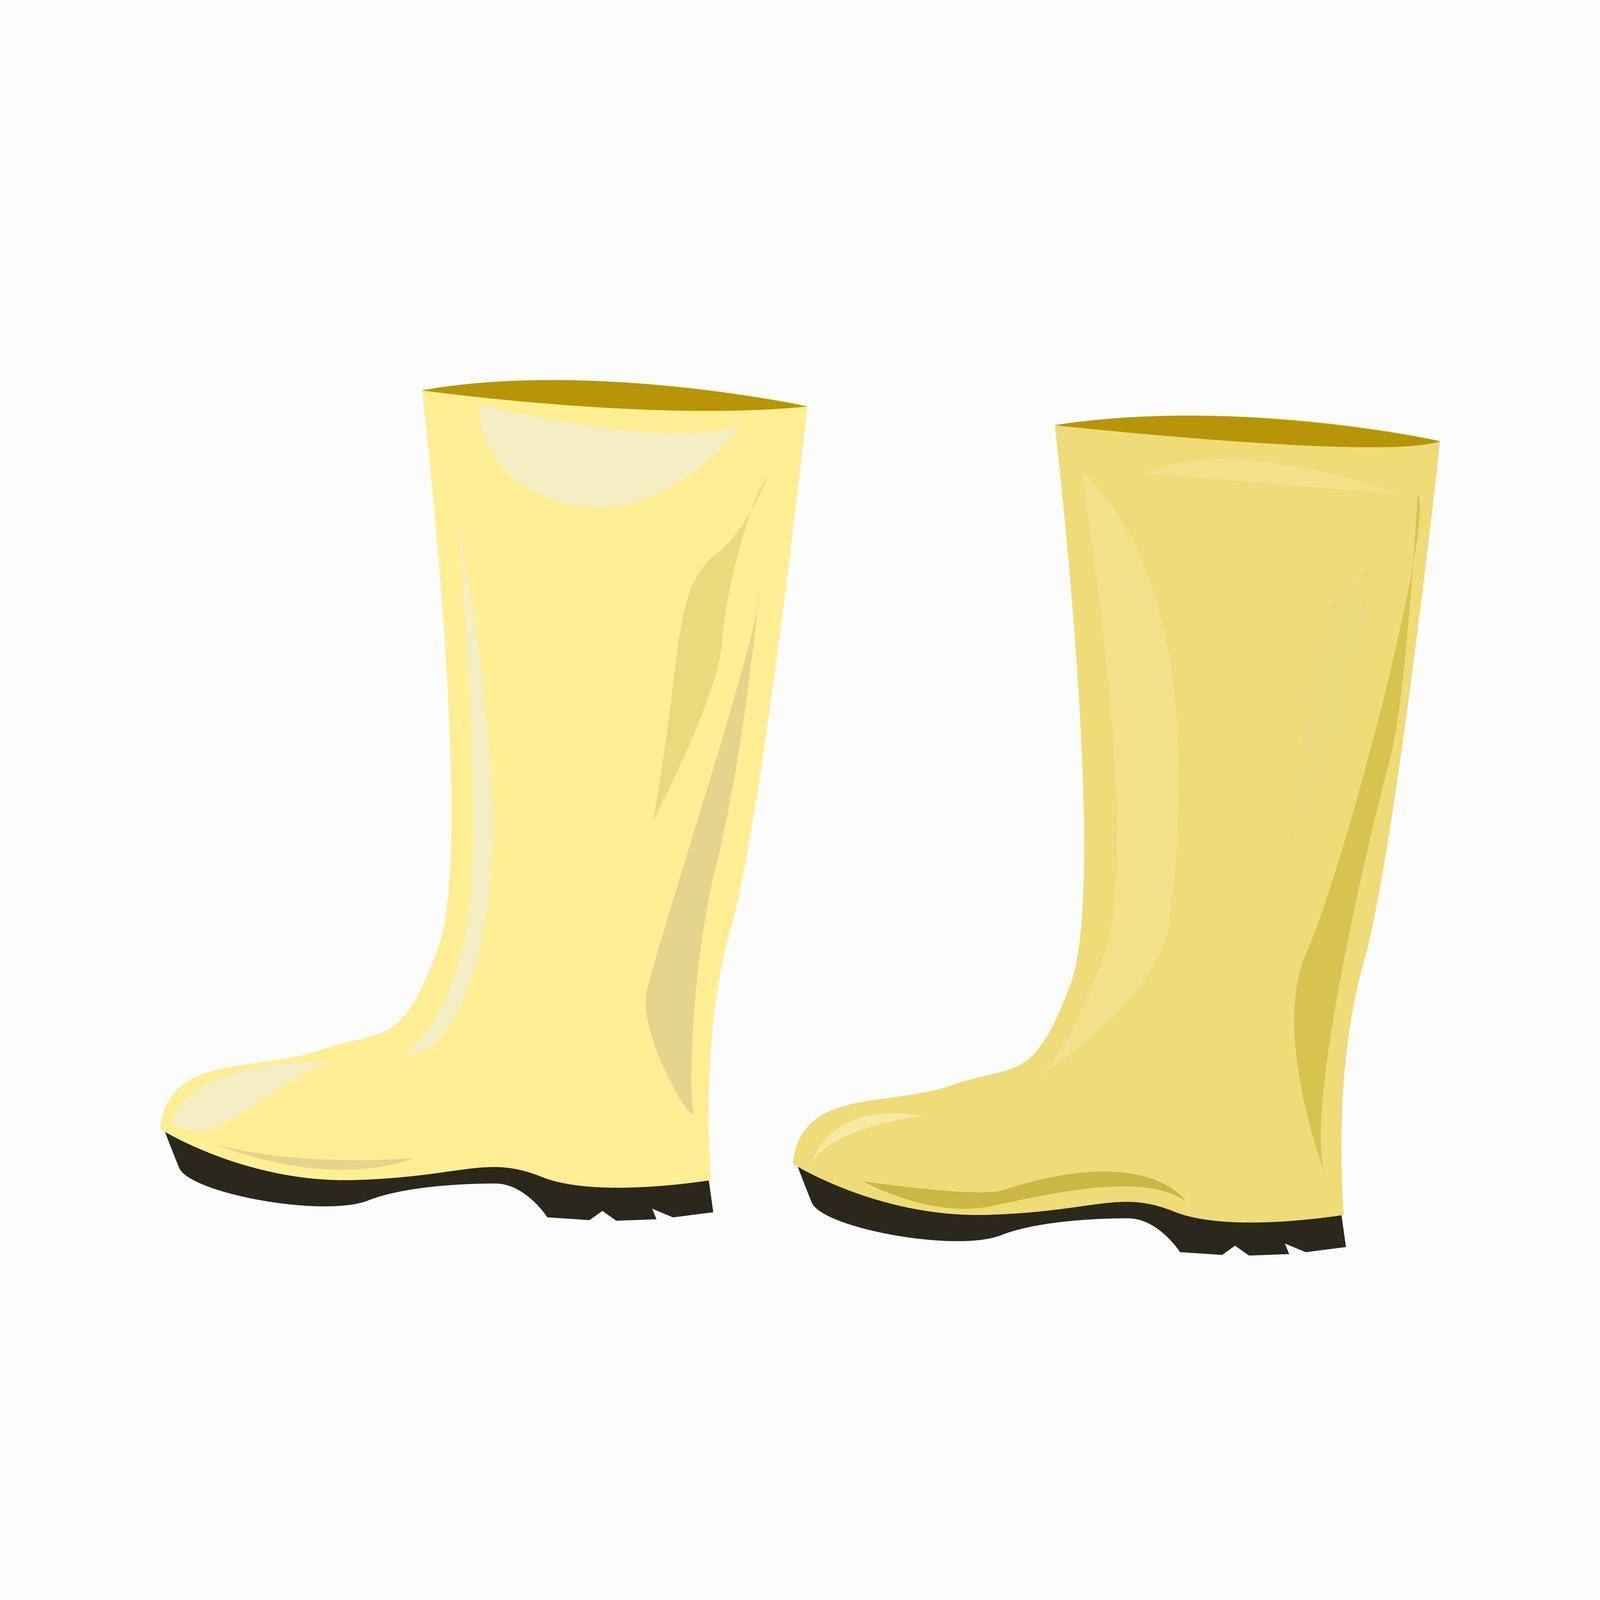 A pair of yellow rubber boots by EvgeniyaEgorova